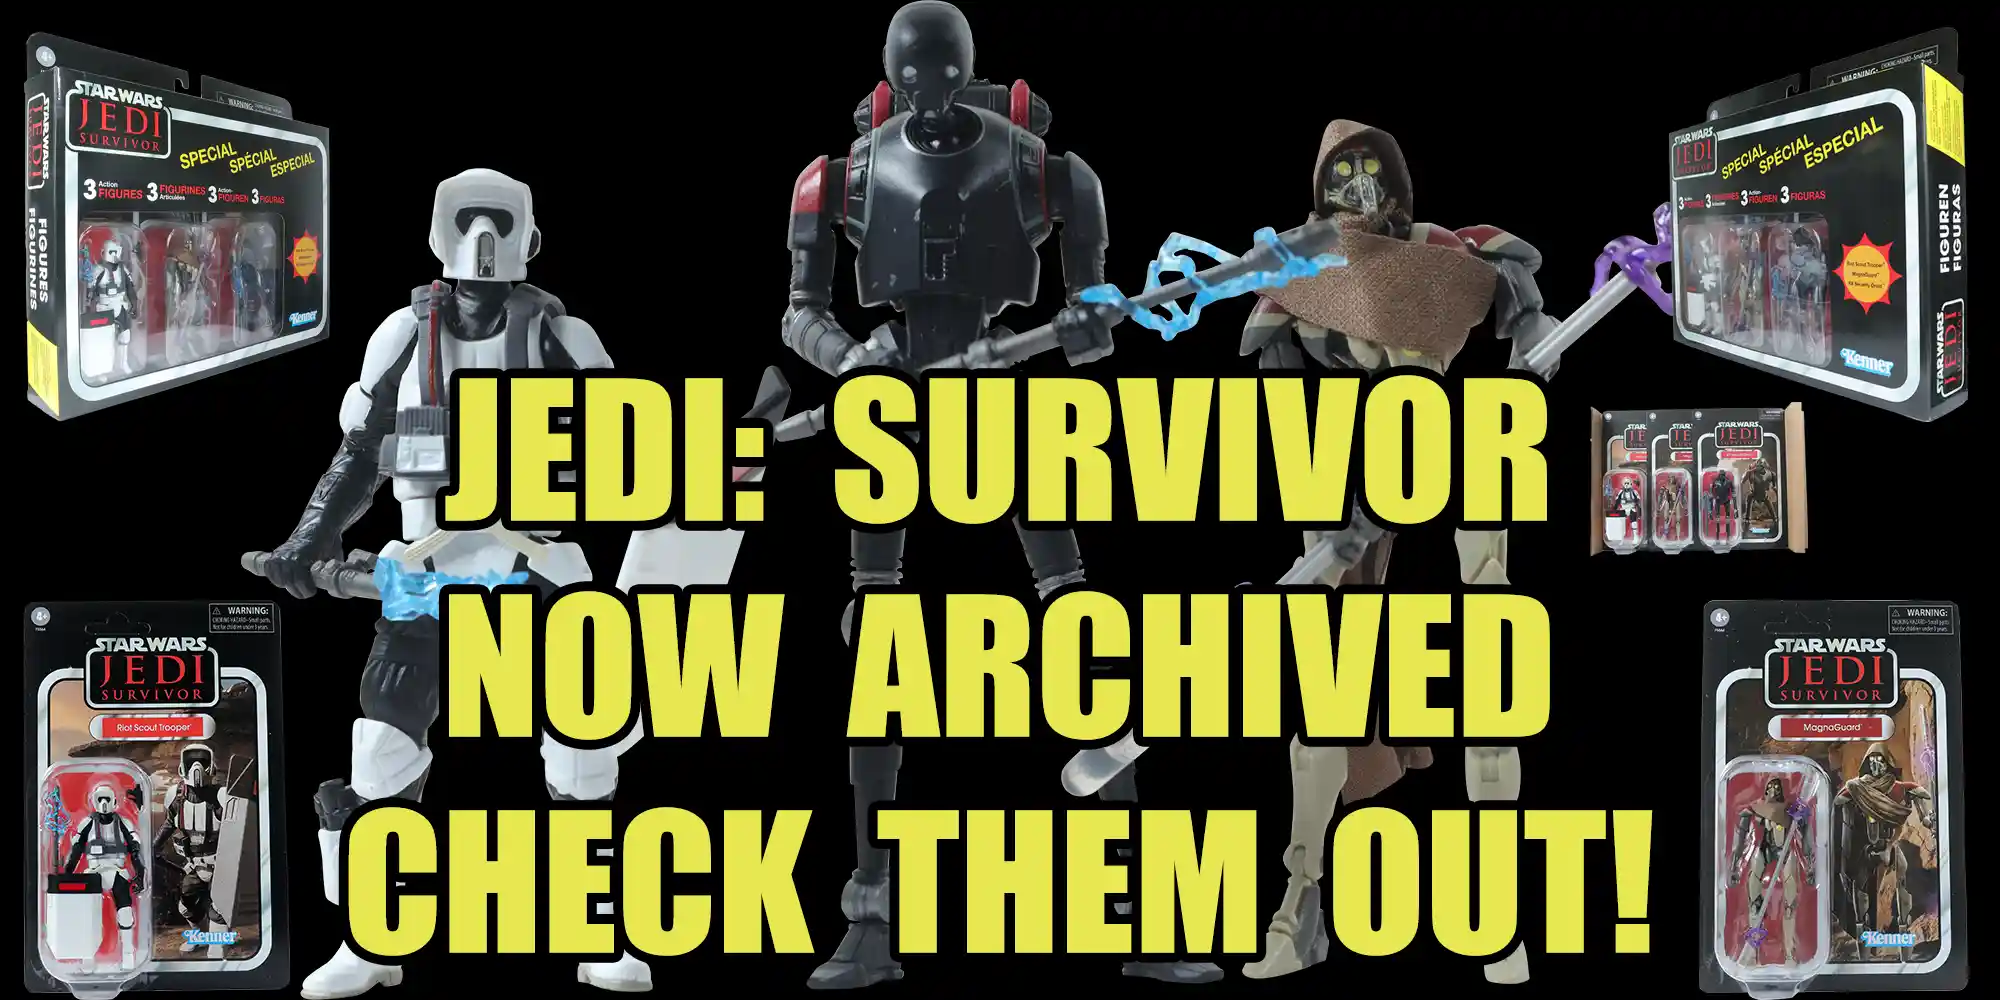 Jedi: Survivor 3-Pack Now Archived - Take A Look!